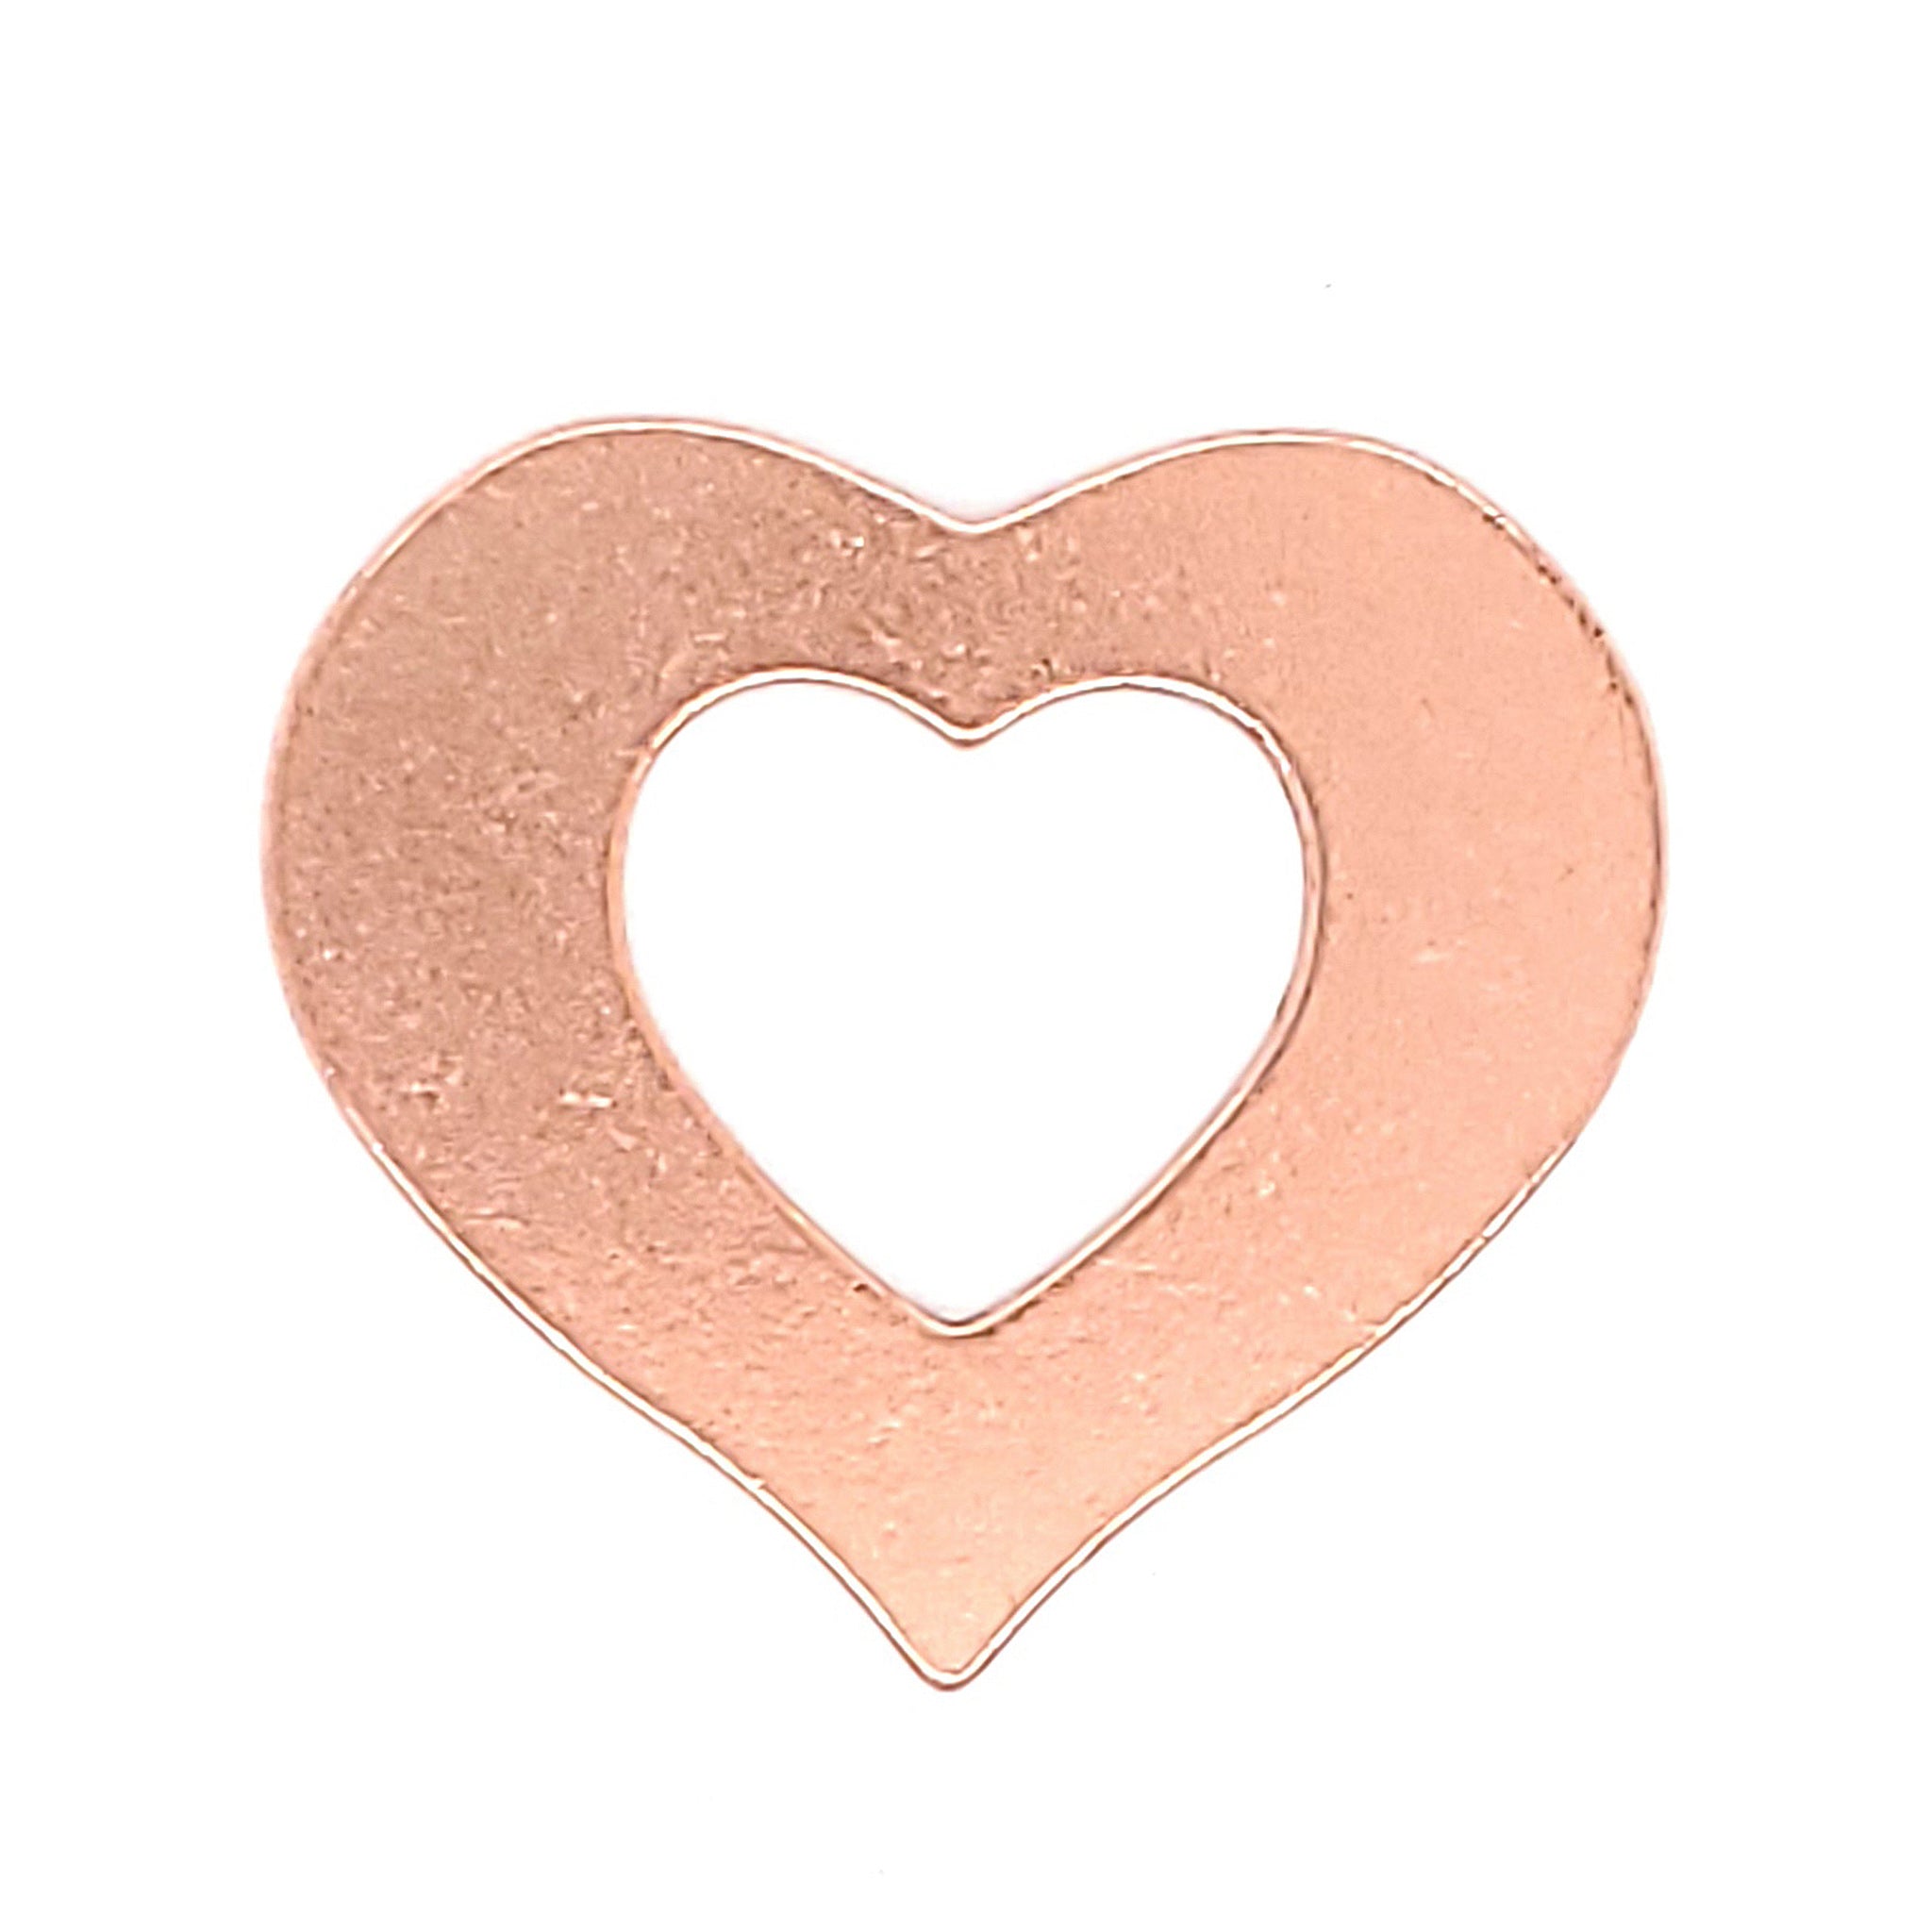 Copper blank heart outline pendant-stainless copper brass jewelry wholesale copper brass bronze jewelry difference between copper brass jewelry findings copper brass jewelry making copper jewelry brass brush copper vs brass jewelry